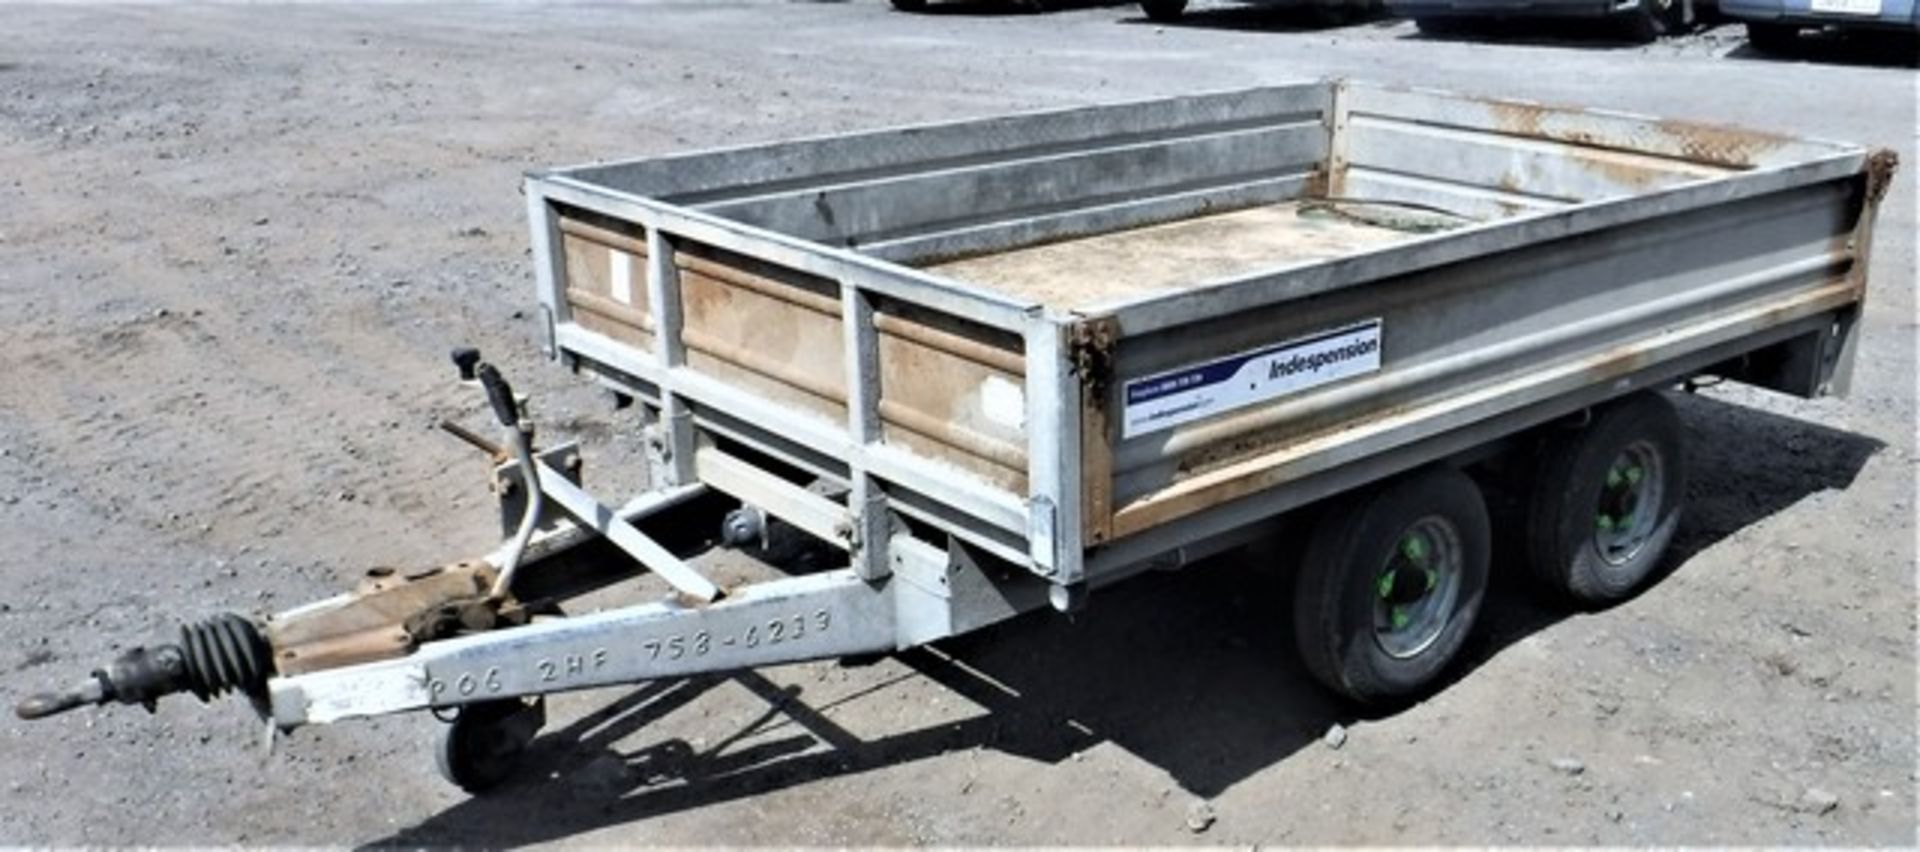 INDESPENSION twin axle dropside trailer. Type - FB20085DY.6. S/N 079054. Asset no - 758-6213